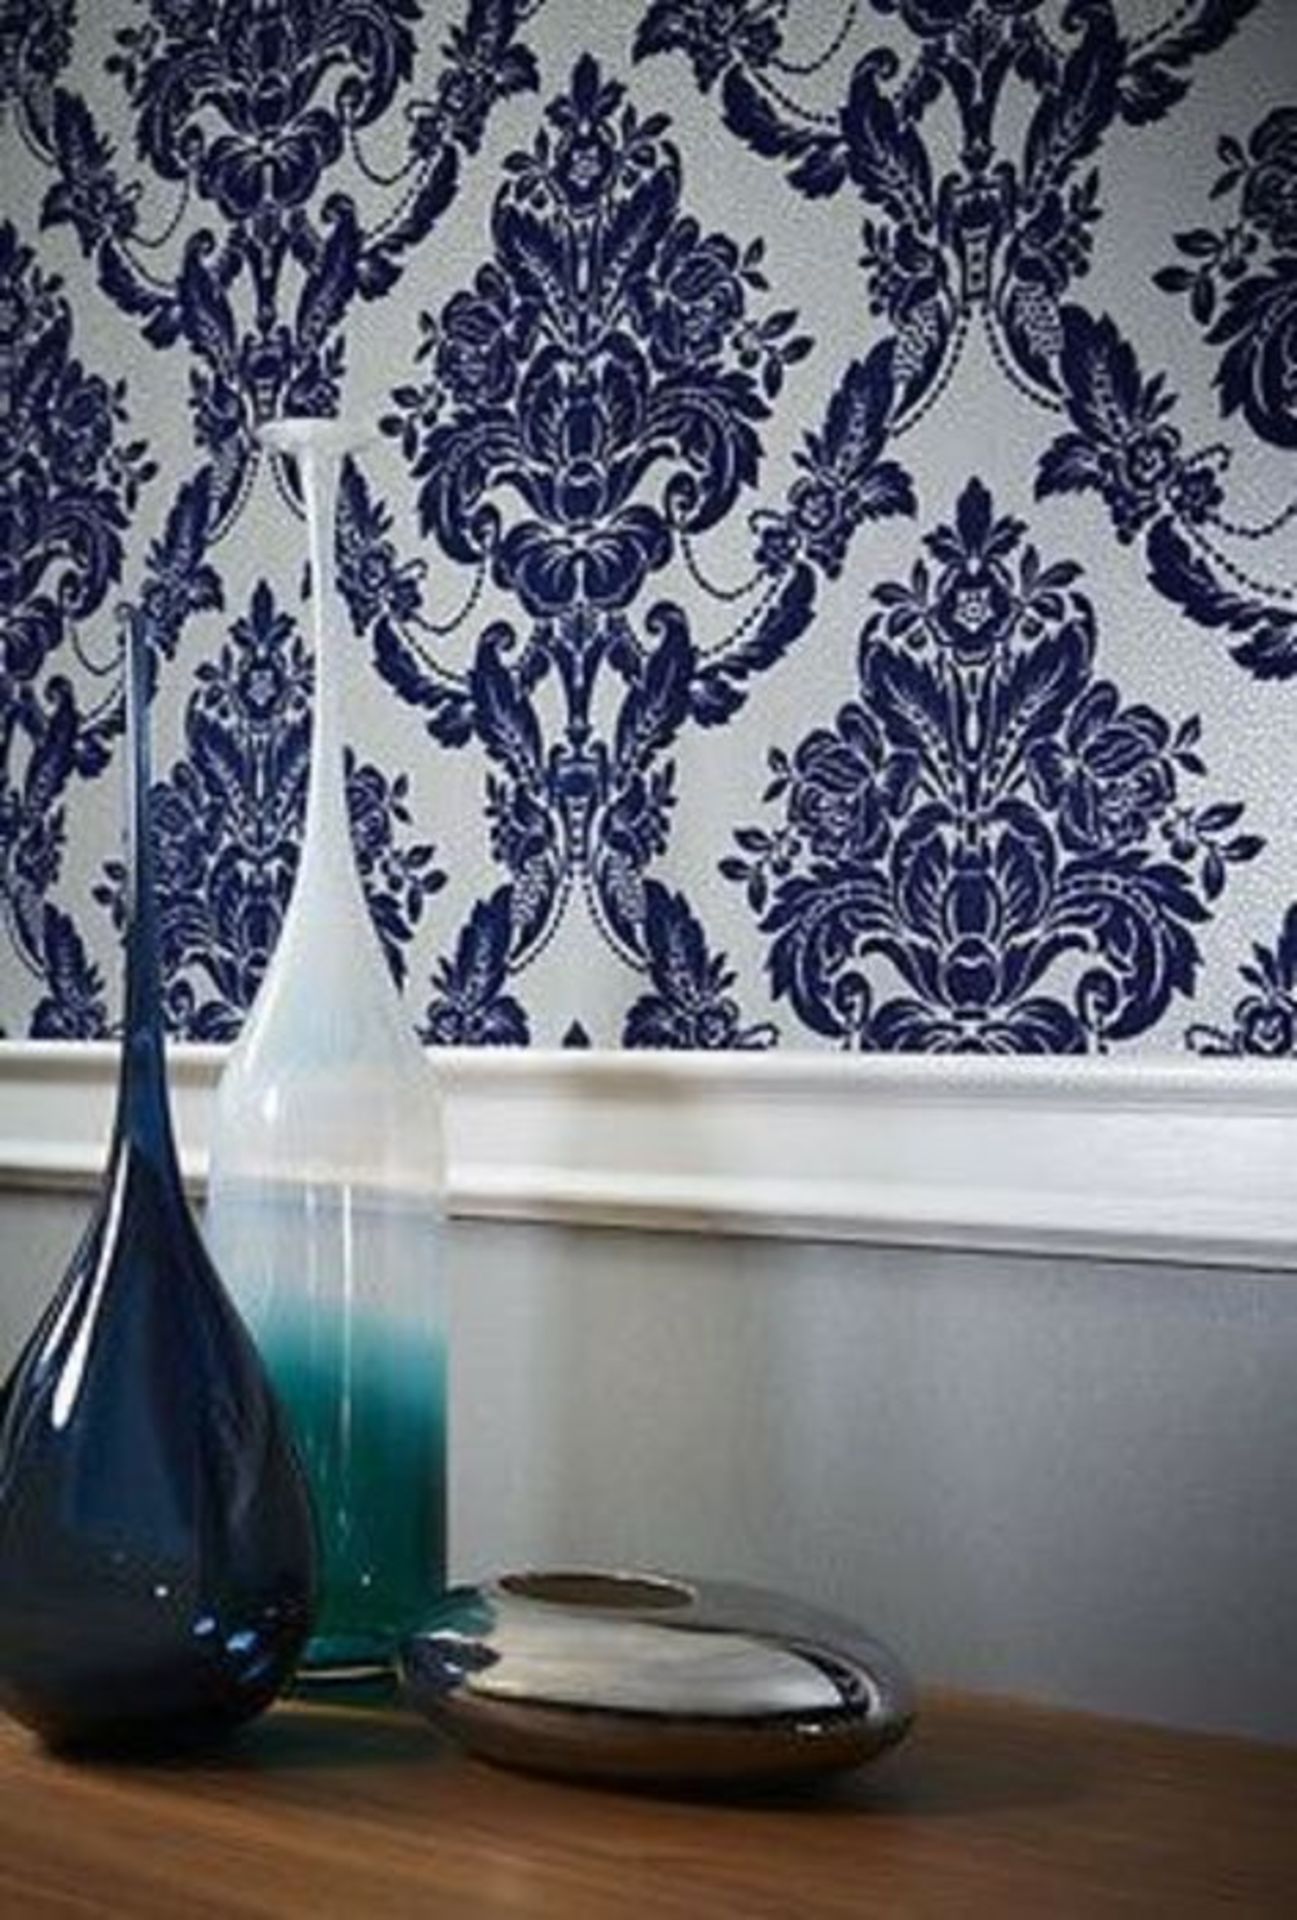 1 X ROLL OF ARTHOUSE SOPHIE CONRAN FLOCK FLEECE WALLPAPER, PALAIS SPOT IN NAVY - 900502 / AS NEW - Image 2 of 3